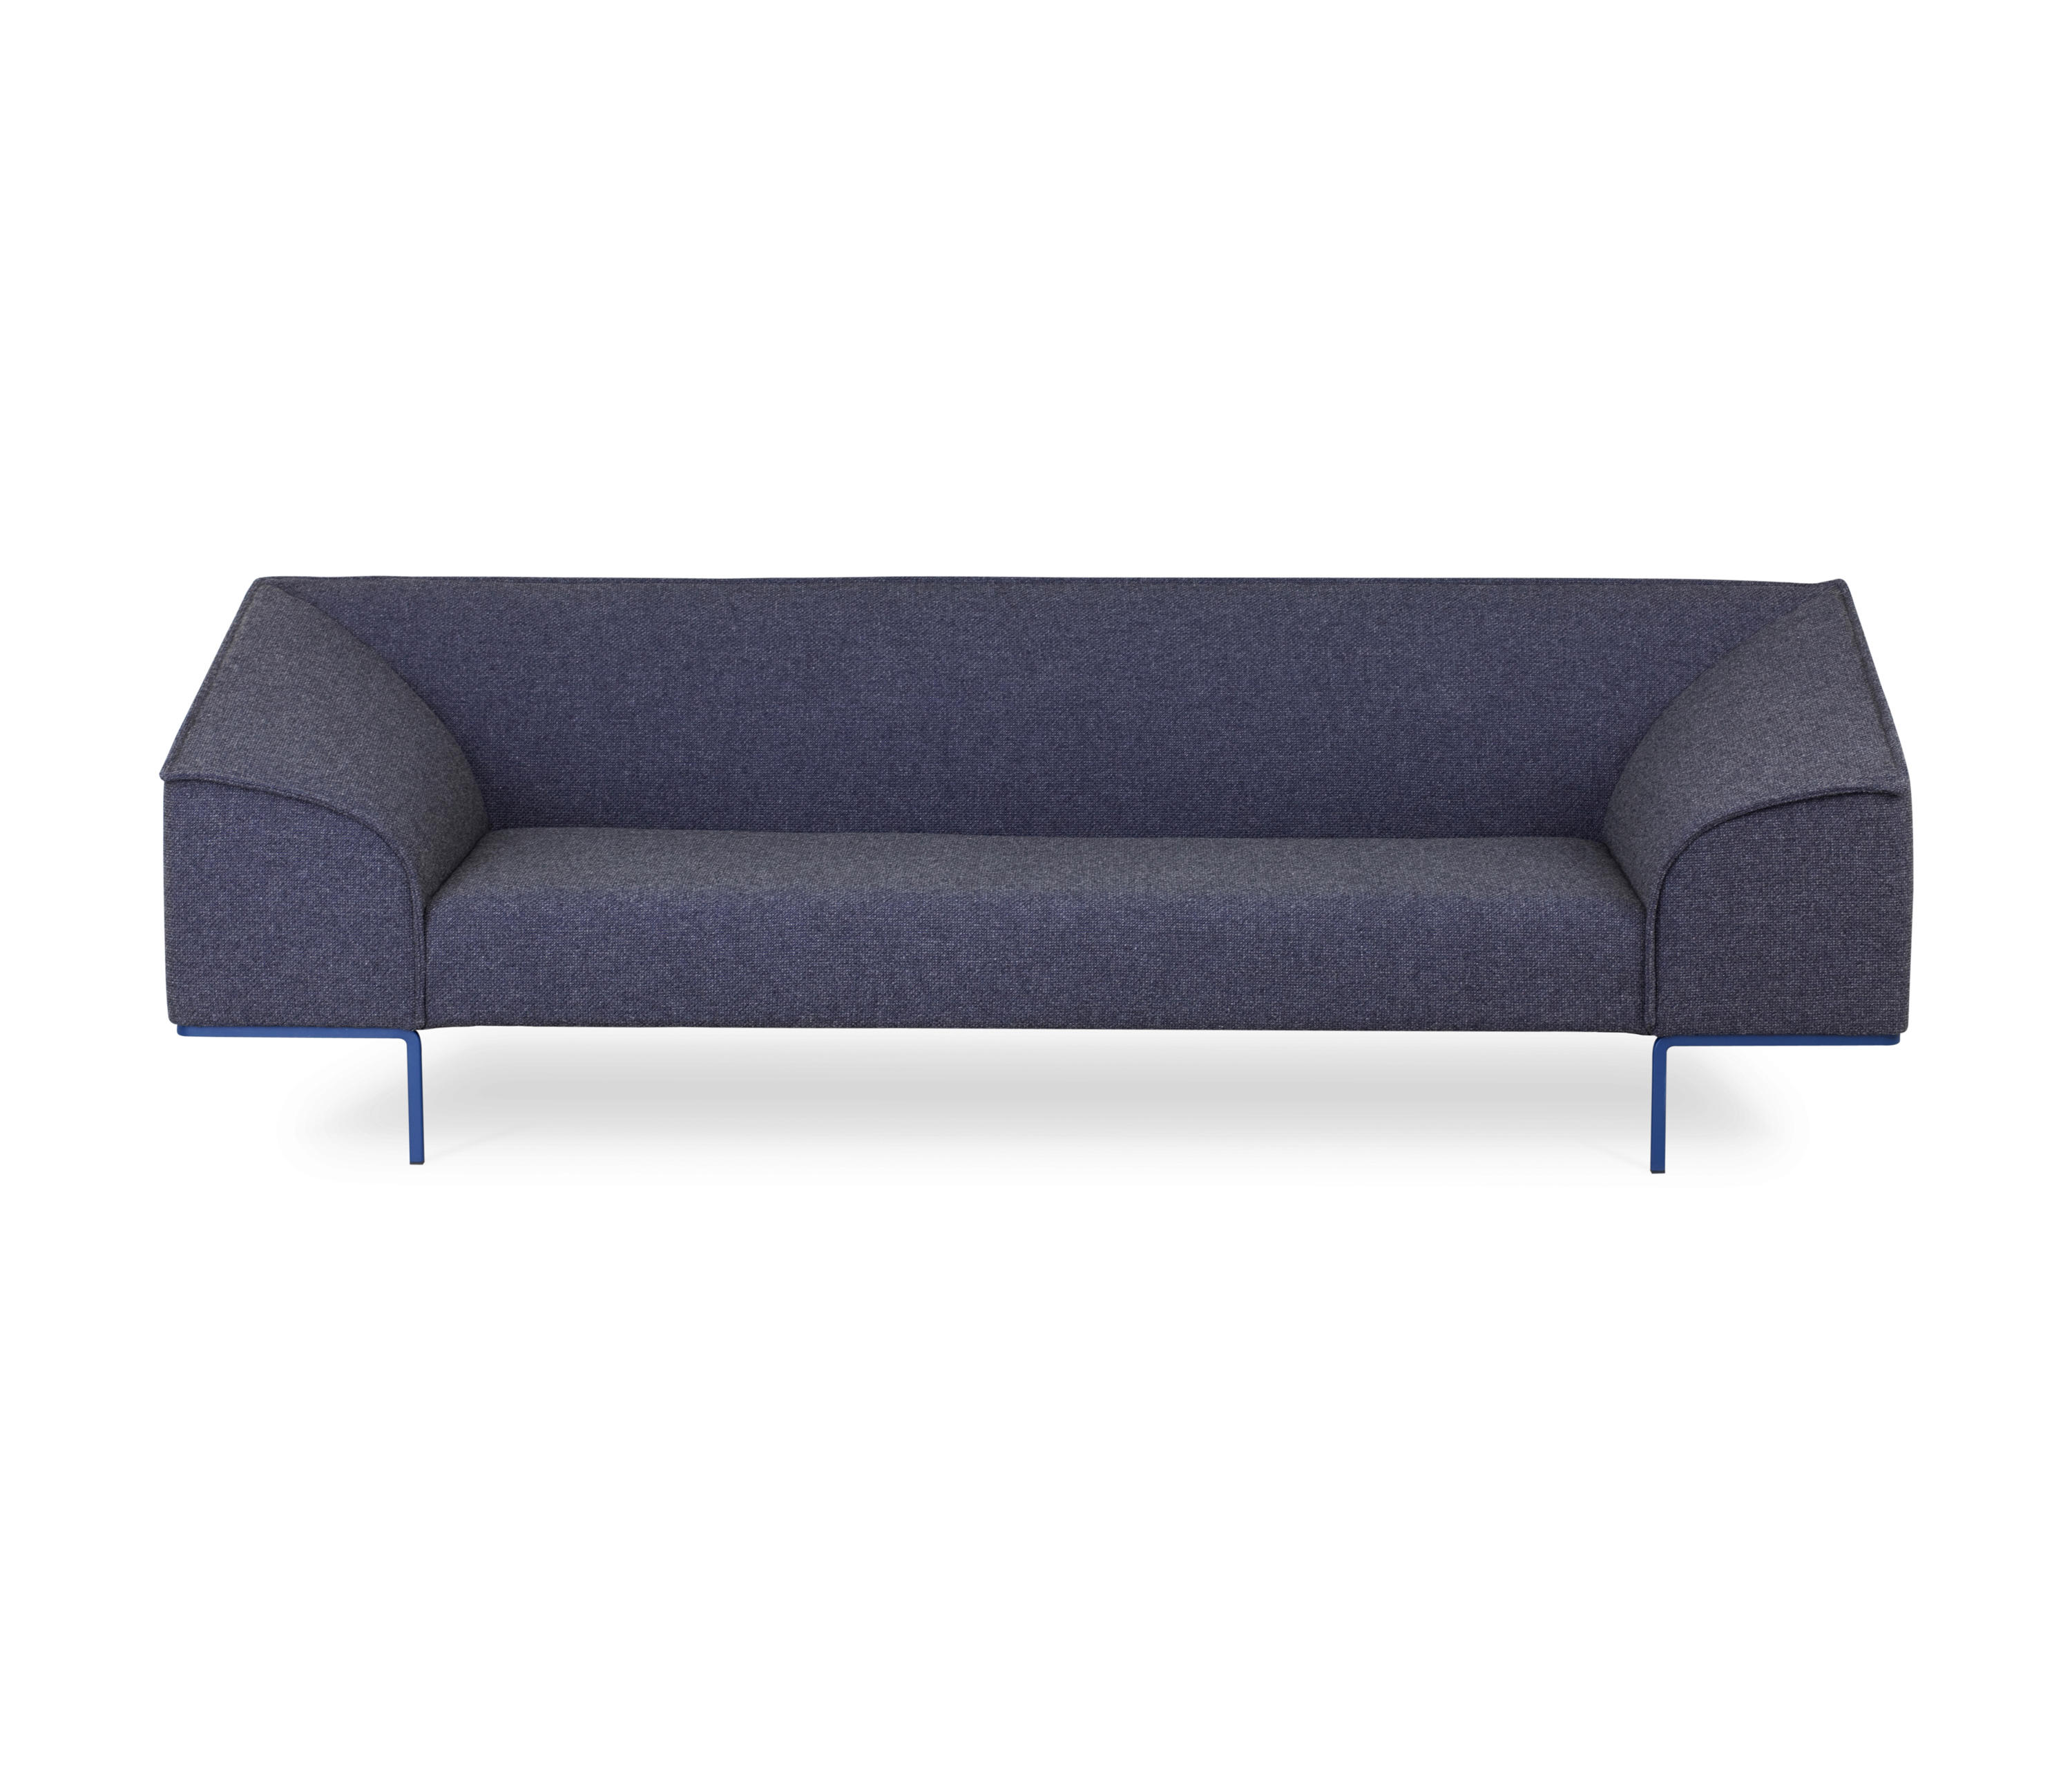 Seam Seating Collection by Prostoria